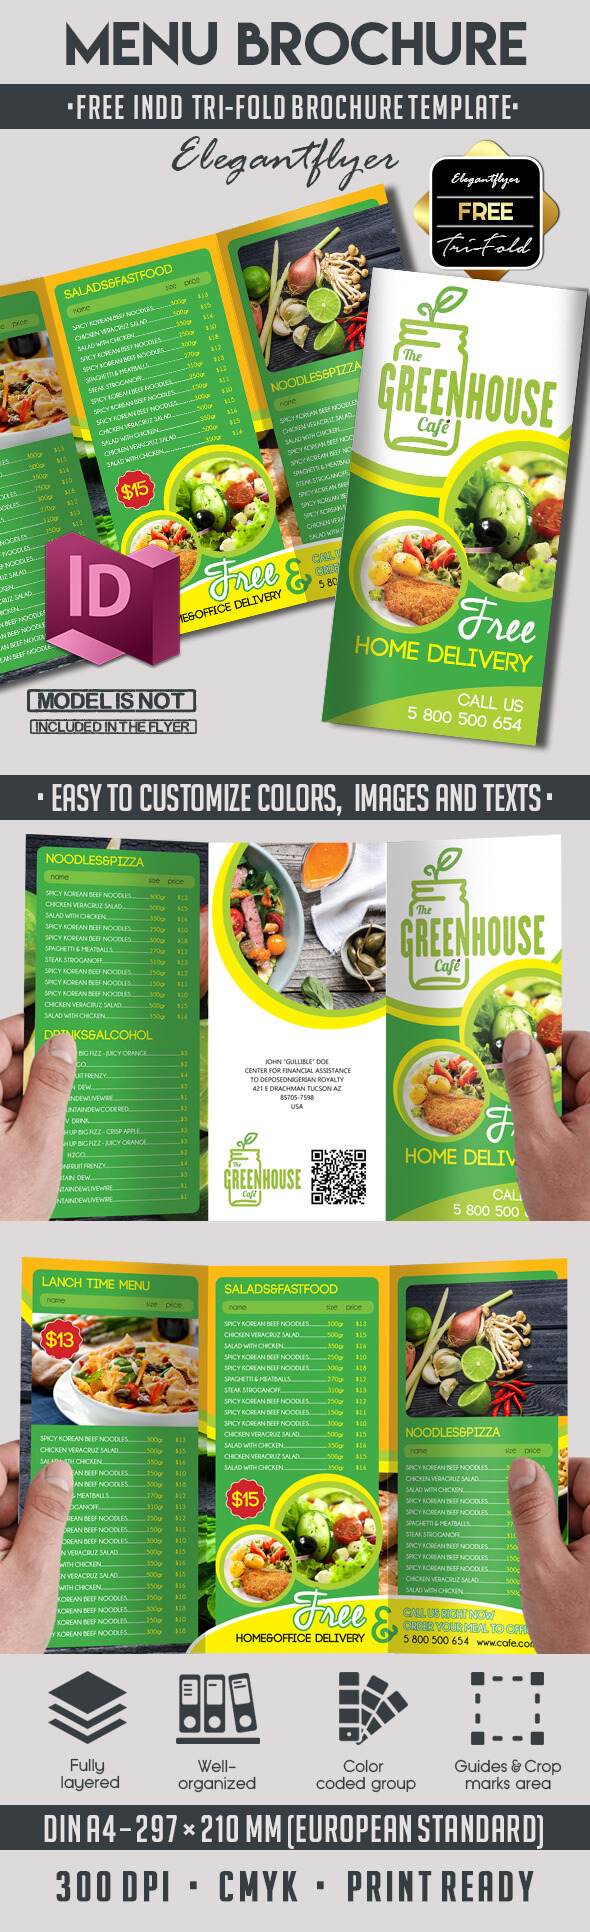 5 Powerful Free Adobe Indesign Brochures Templates! | Intended For Adobe Indesign Tri Fold Brochure Template